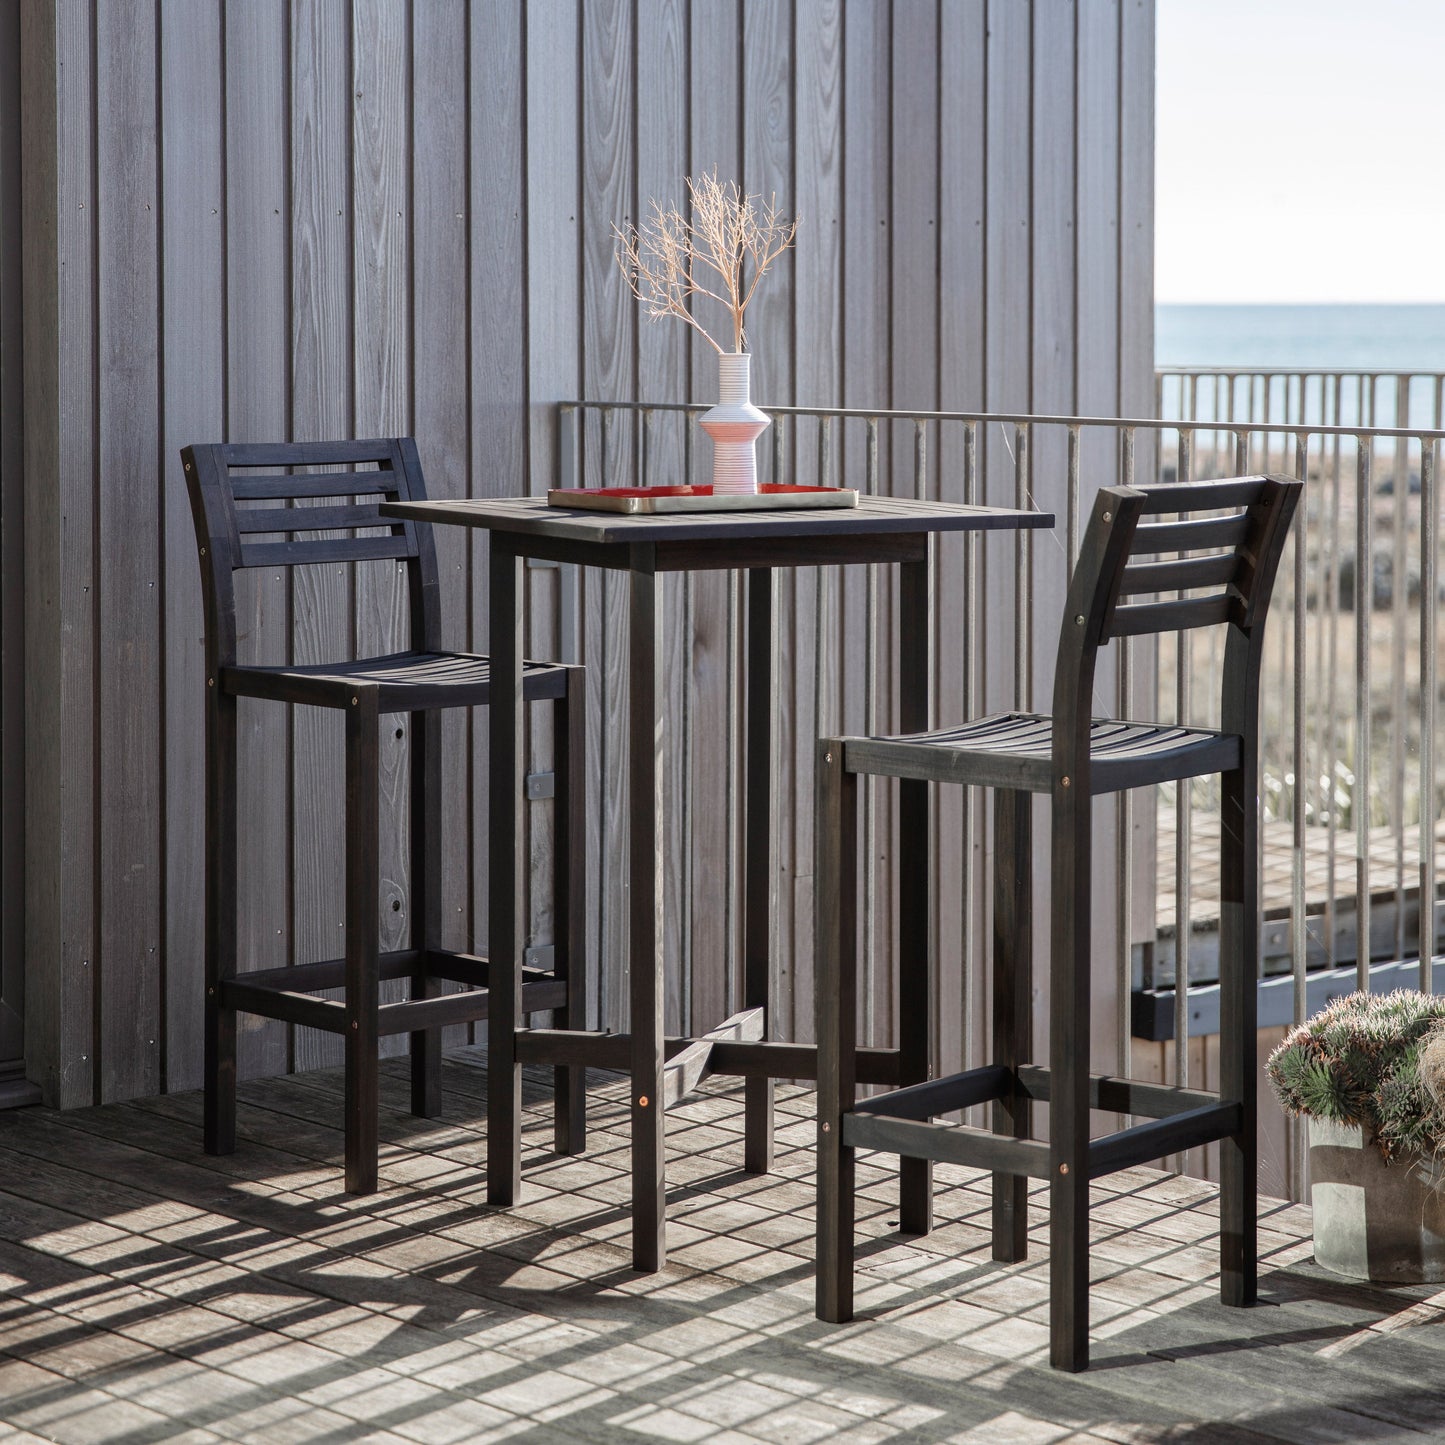 Two Alfrington 2 Seater High Bar Set Black chairs and a table from kikiathome.co.uk, enhancing the interior decor of a balcony overlooking the ocean.